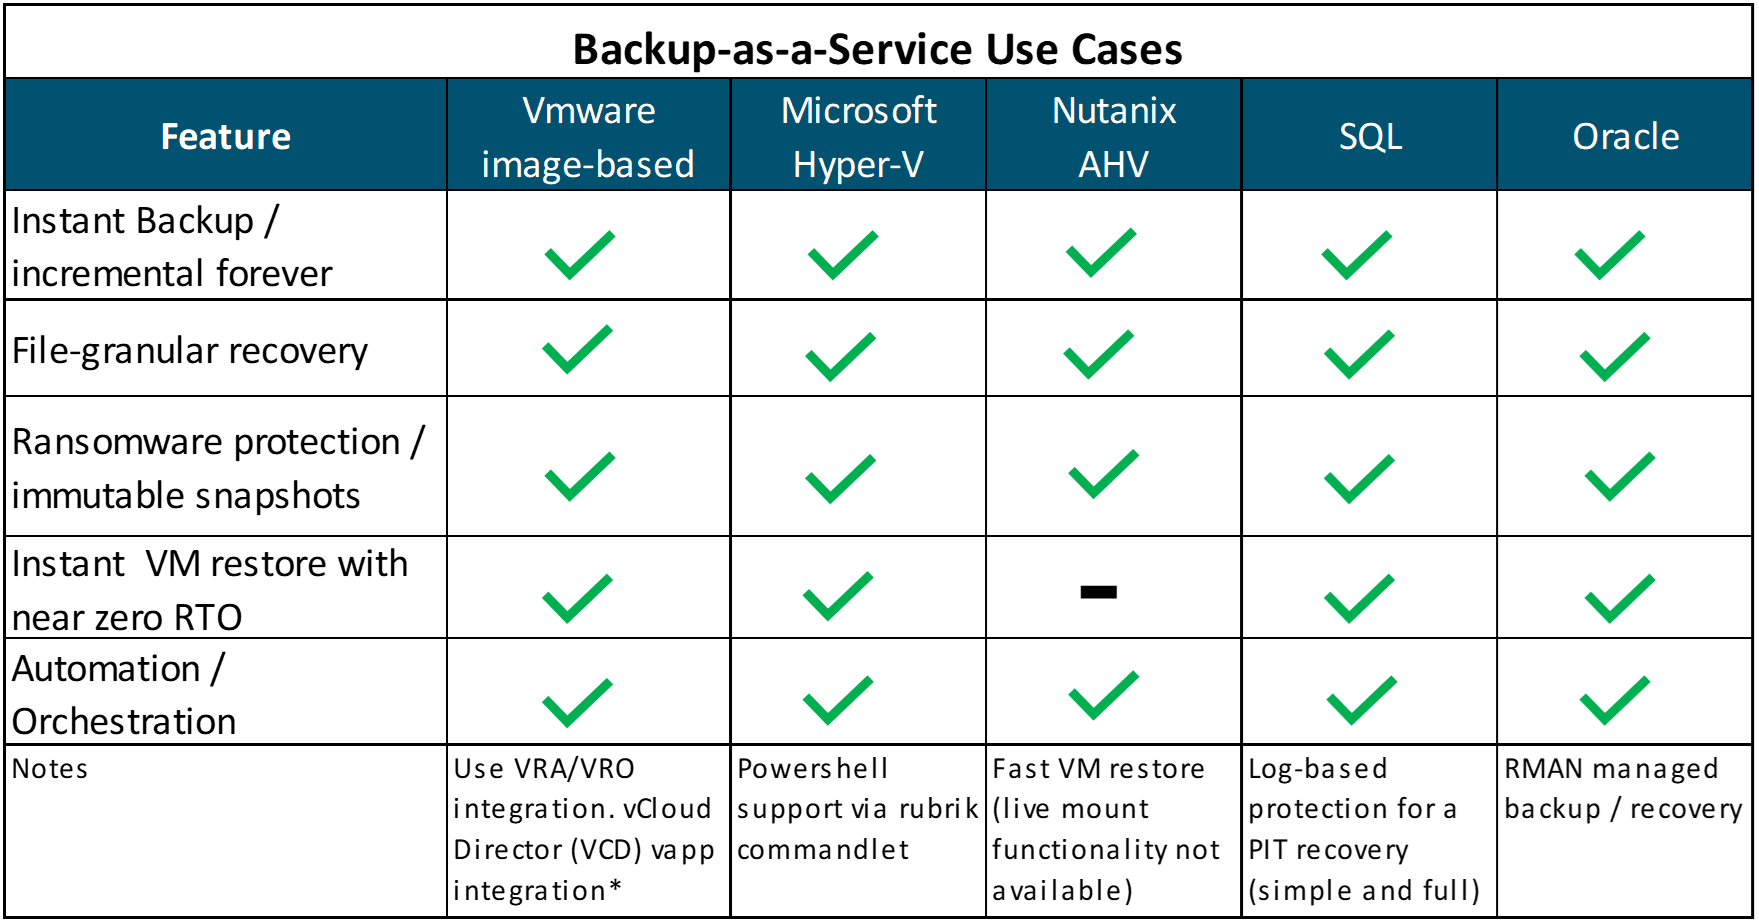 Backup as a Service (BaaS) Use Cases